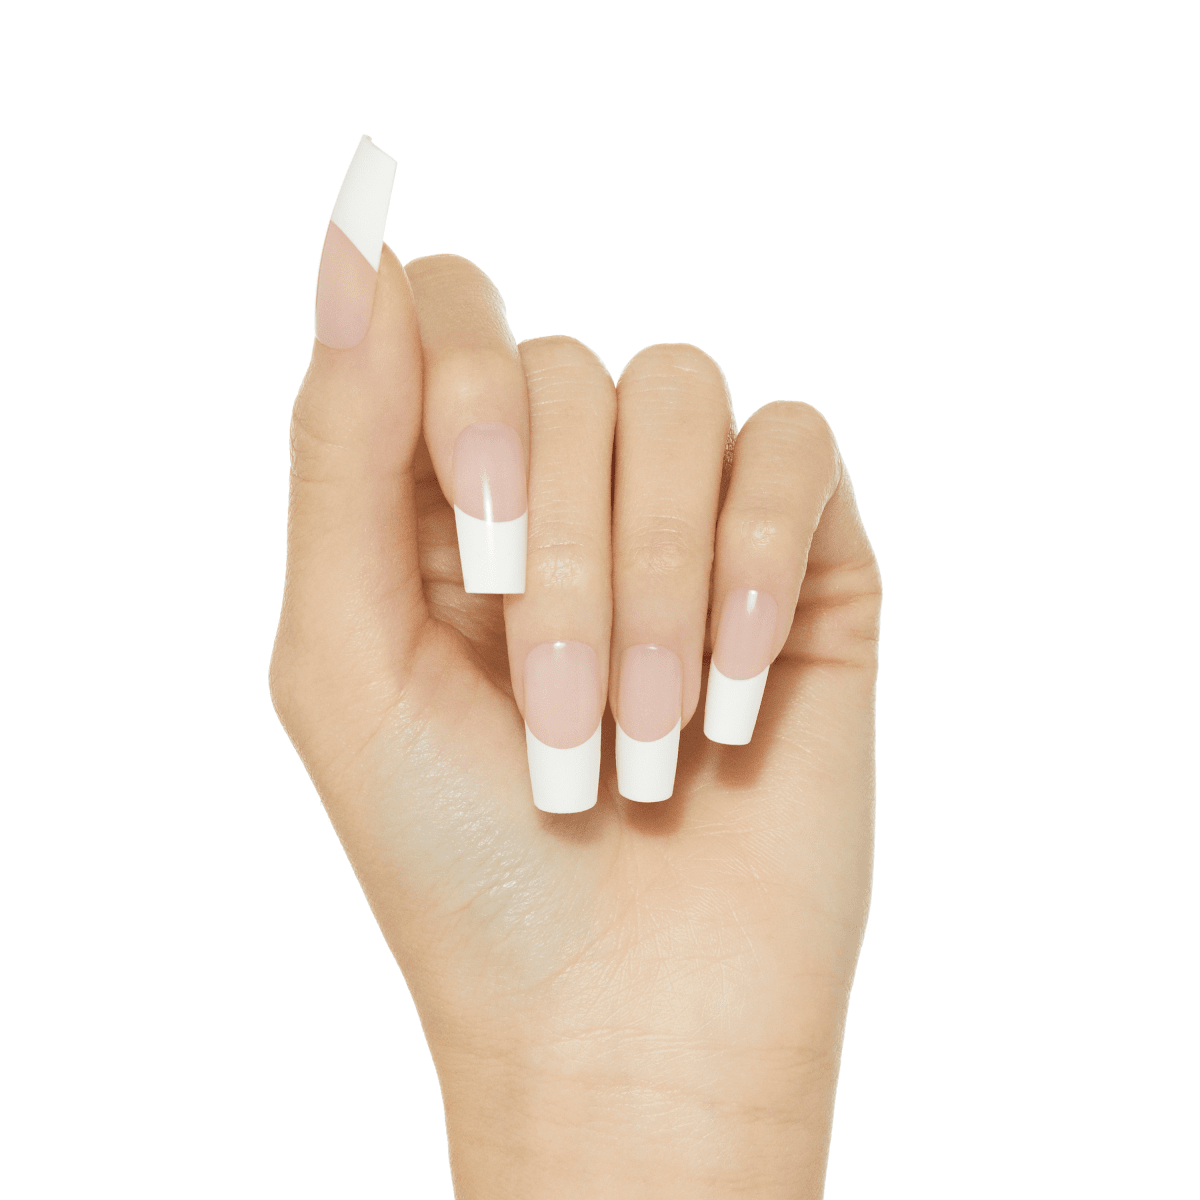 How to prevent acrylic nails from breaking? ⋆ Elite Nails